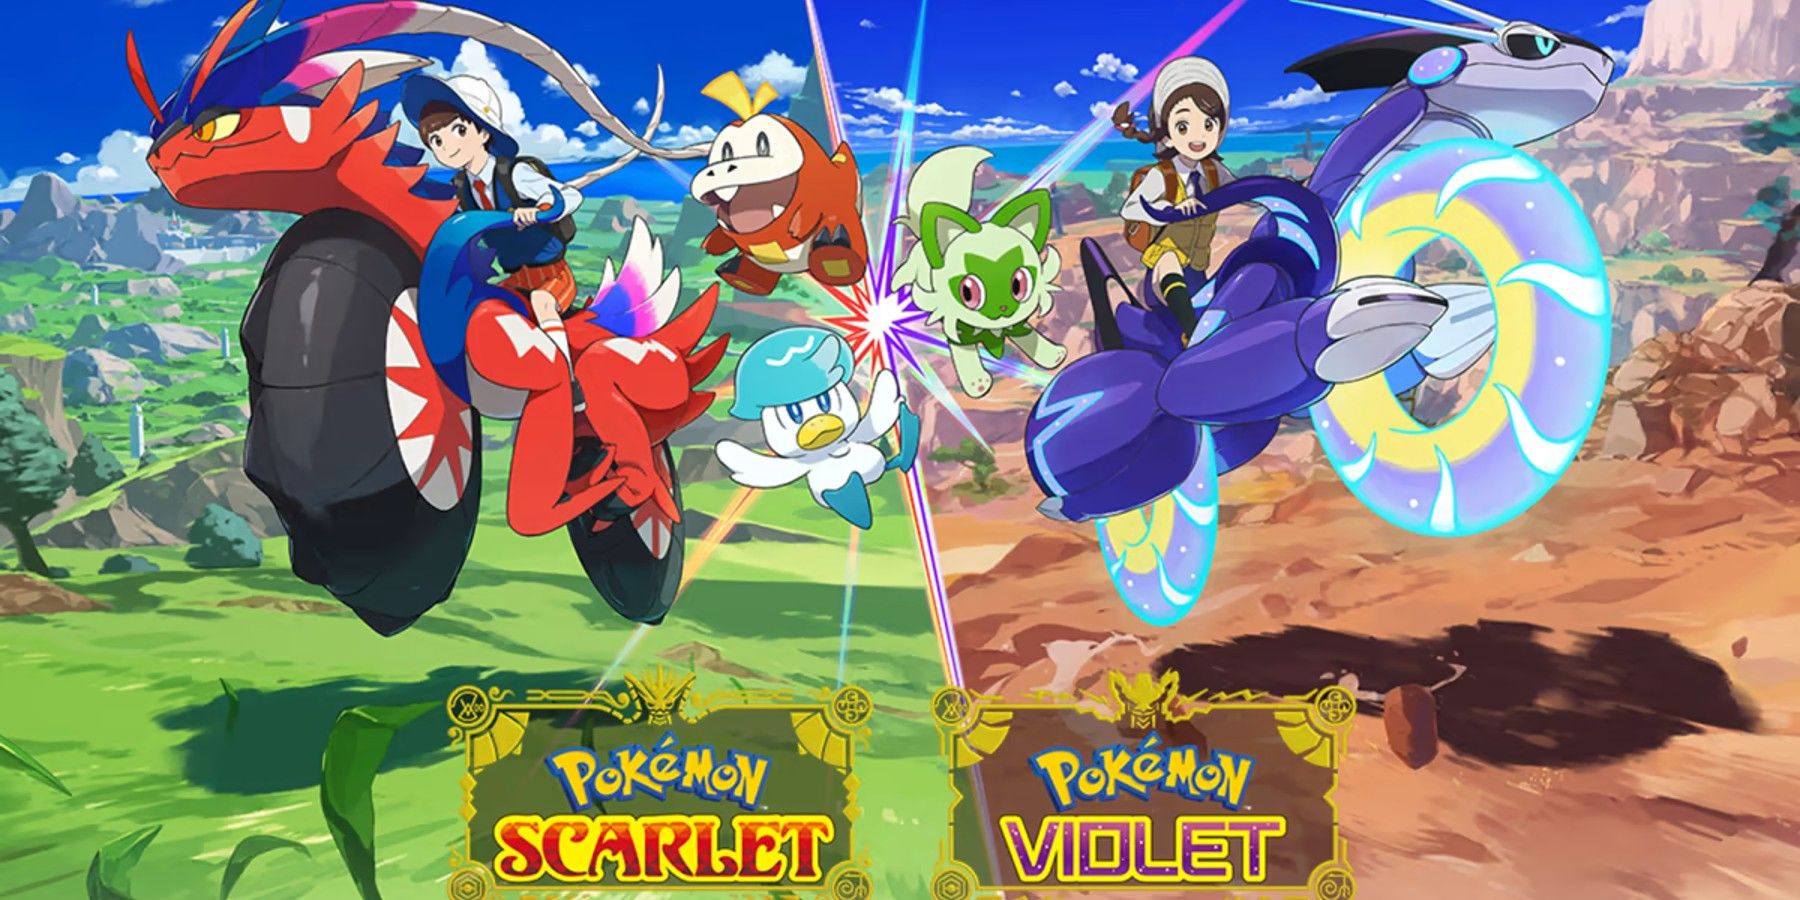 Pokémon Scarlet/Violet is now the lowest-rated mainline game ever